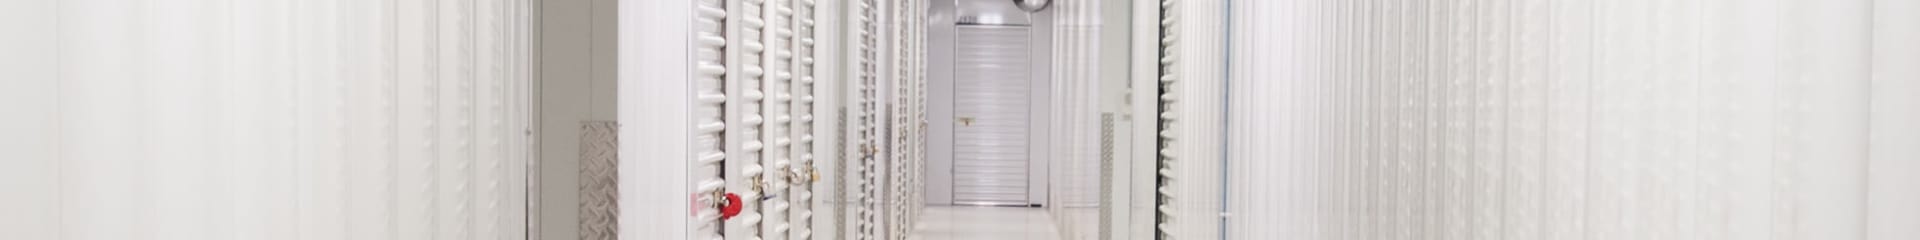 Contact us for your self storage needs in Oak Park